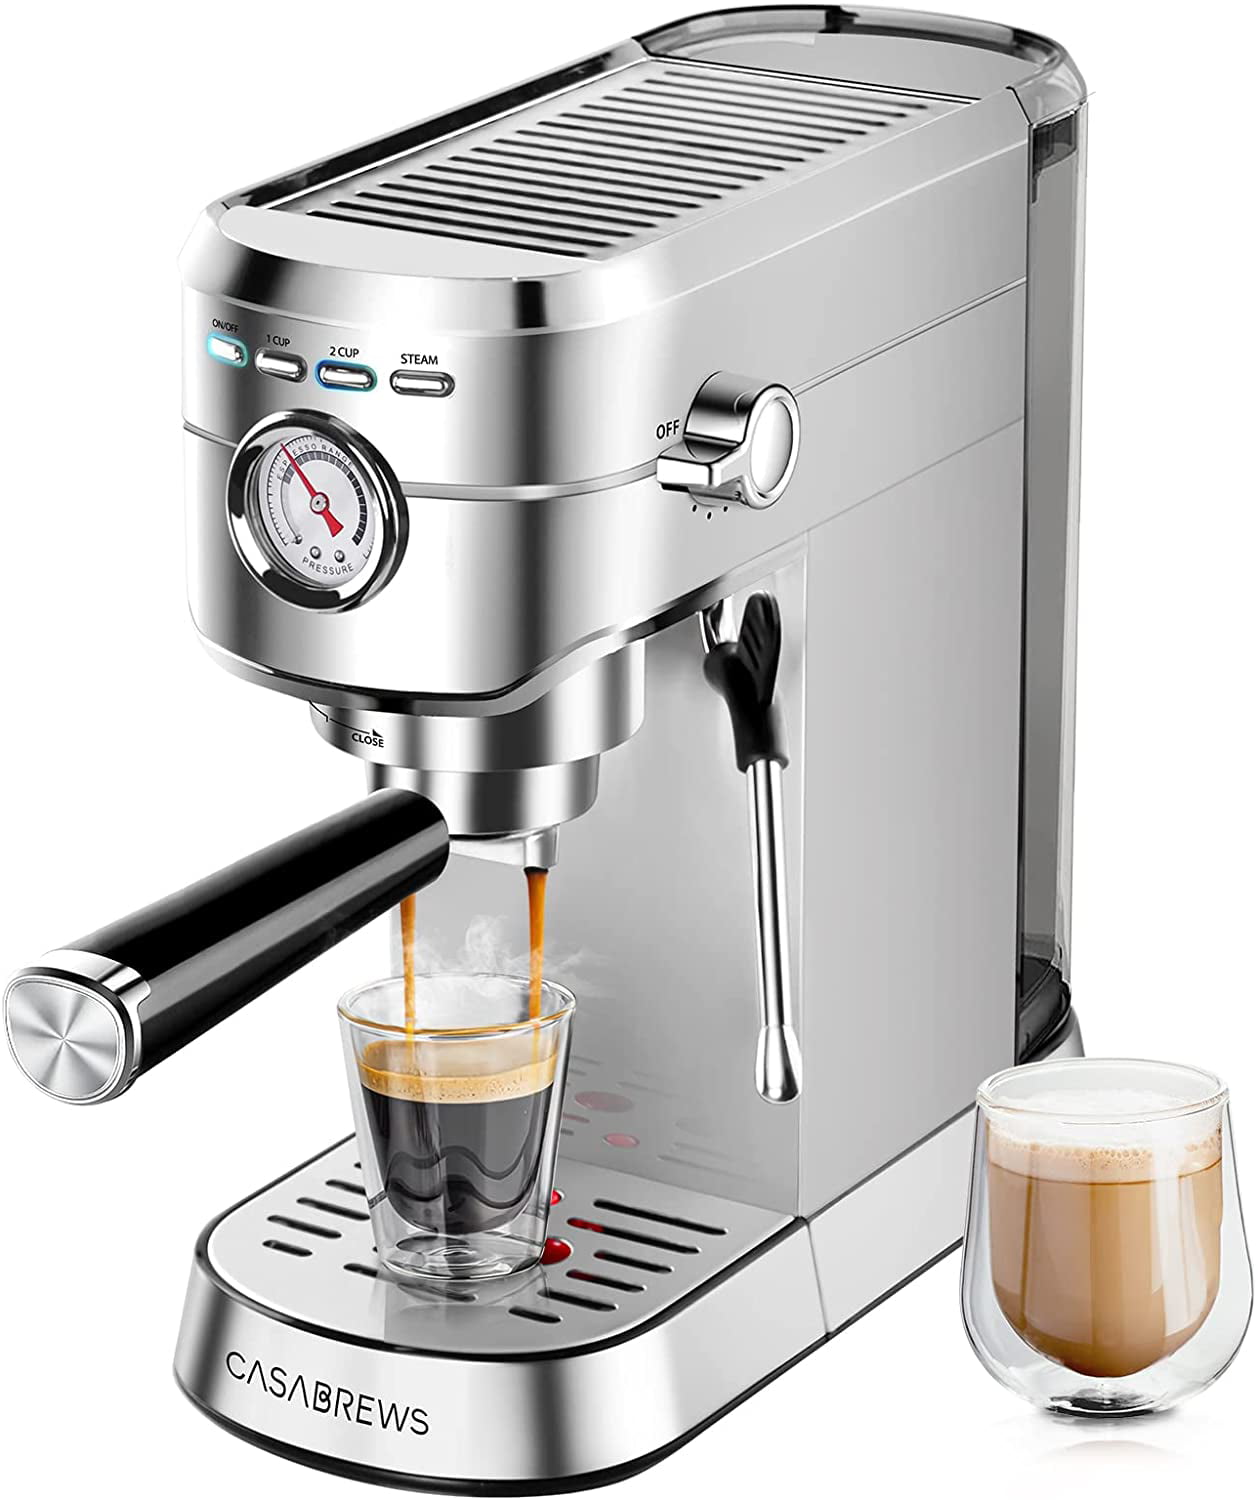 Stainless Steel Espresso Machine with Milk Frother